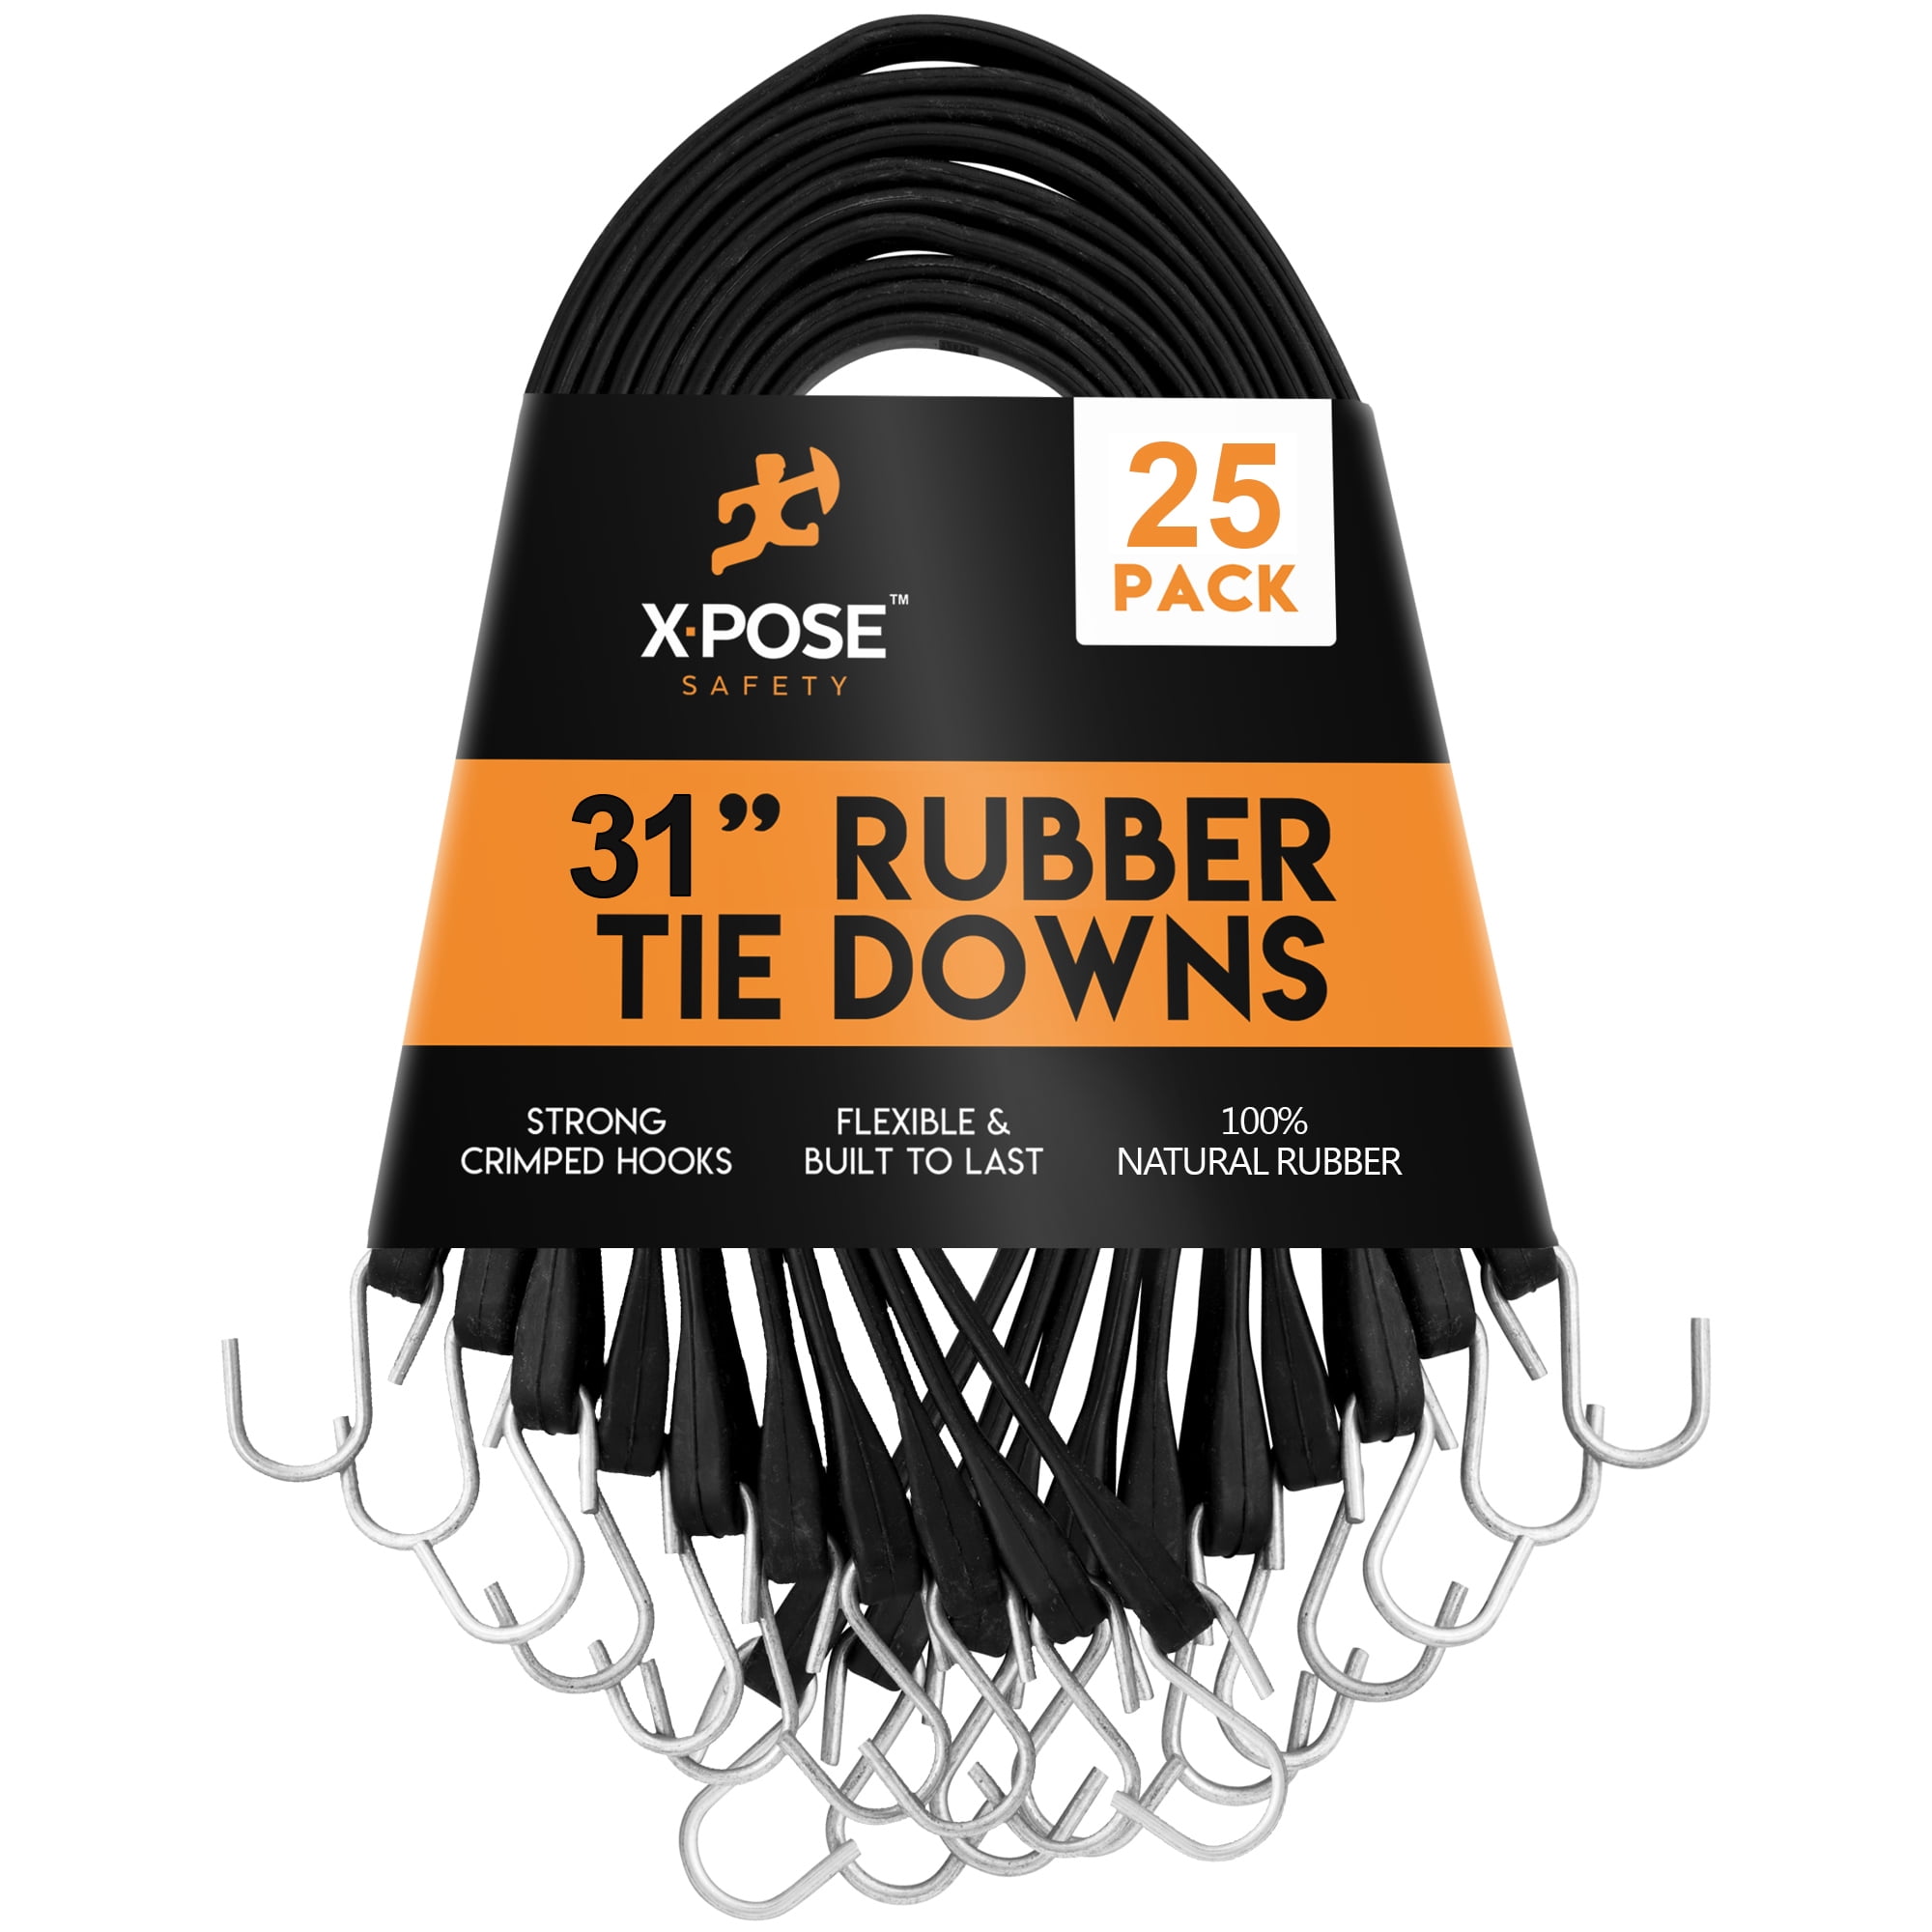 Rubber Bungee Cords with Hooks 25 Pack 31 Inch and Cargo Tarp Covers by Xpose Safety Heavy-Duty Black Tie Down Straps for Outdoor 54” Max Stretch Canvas Canopies Motorcycle 